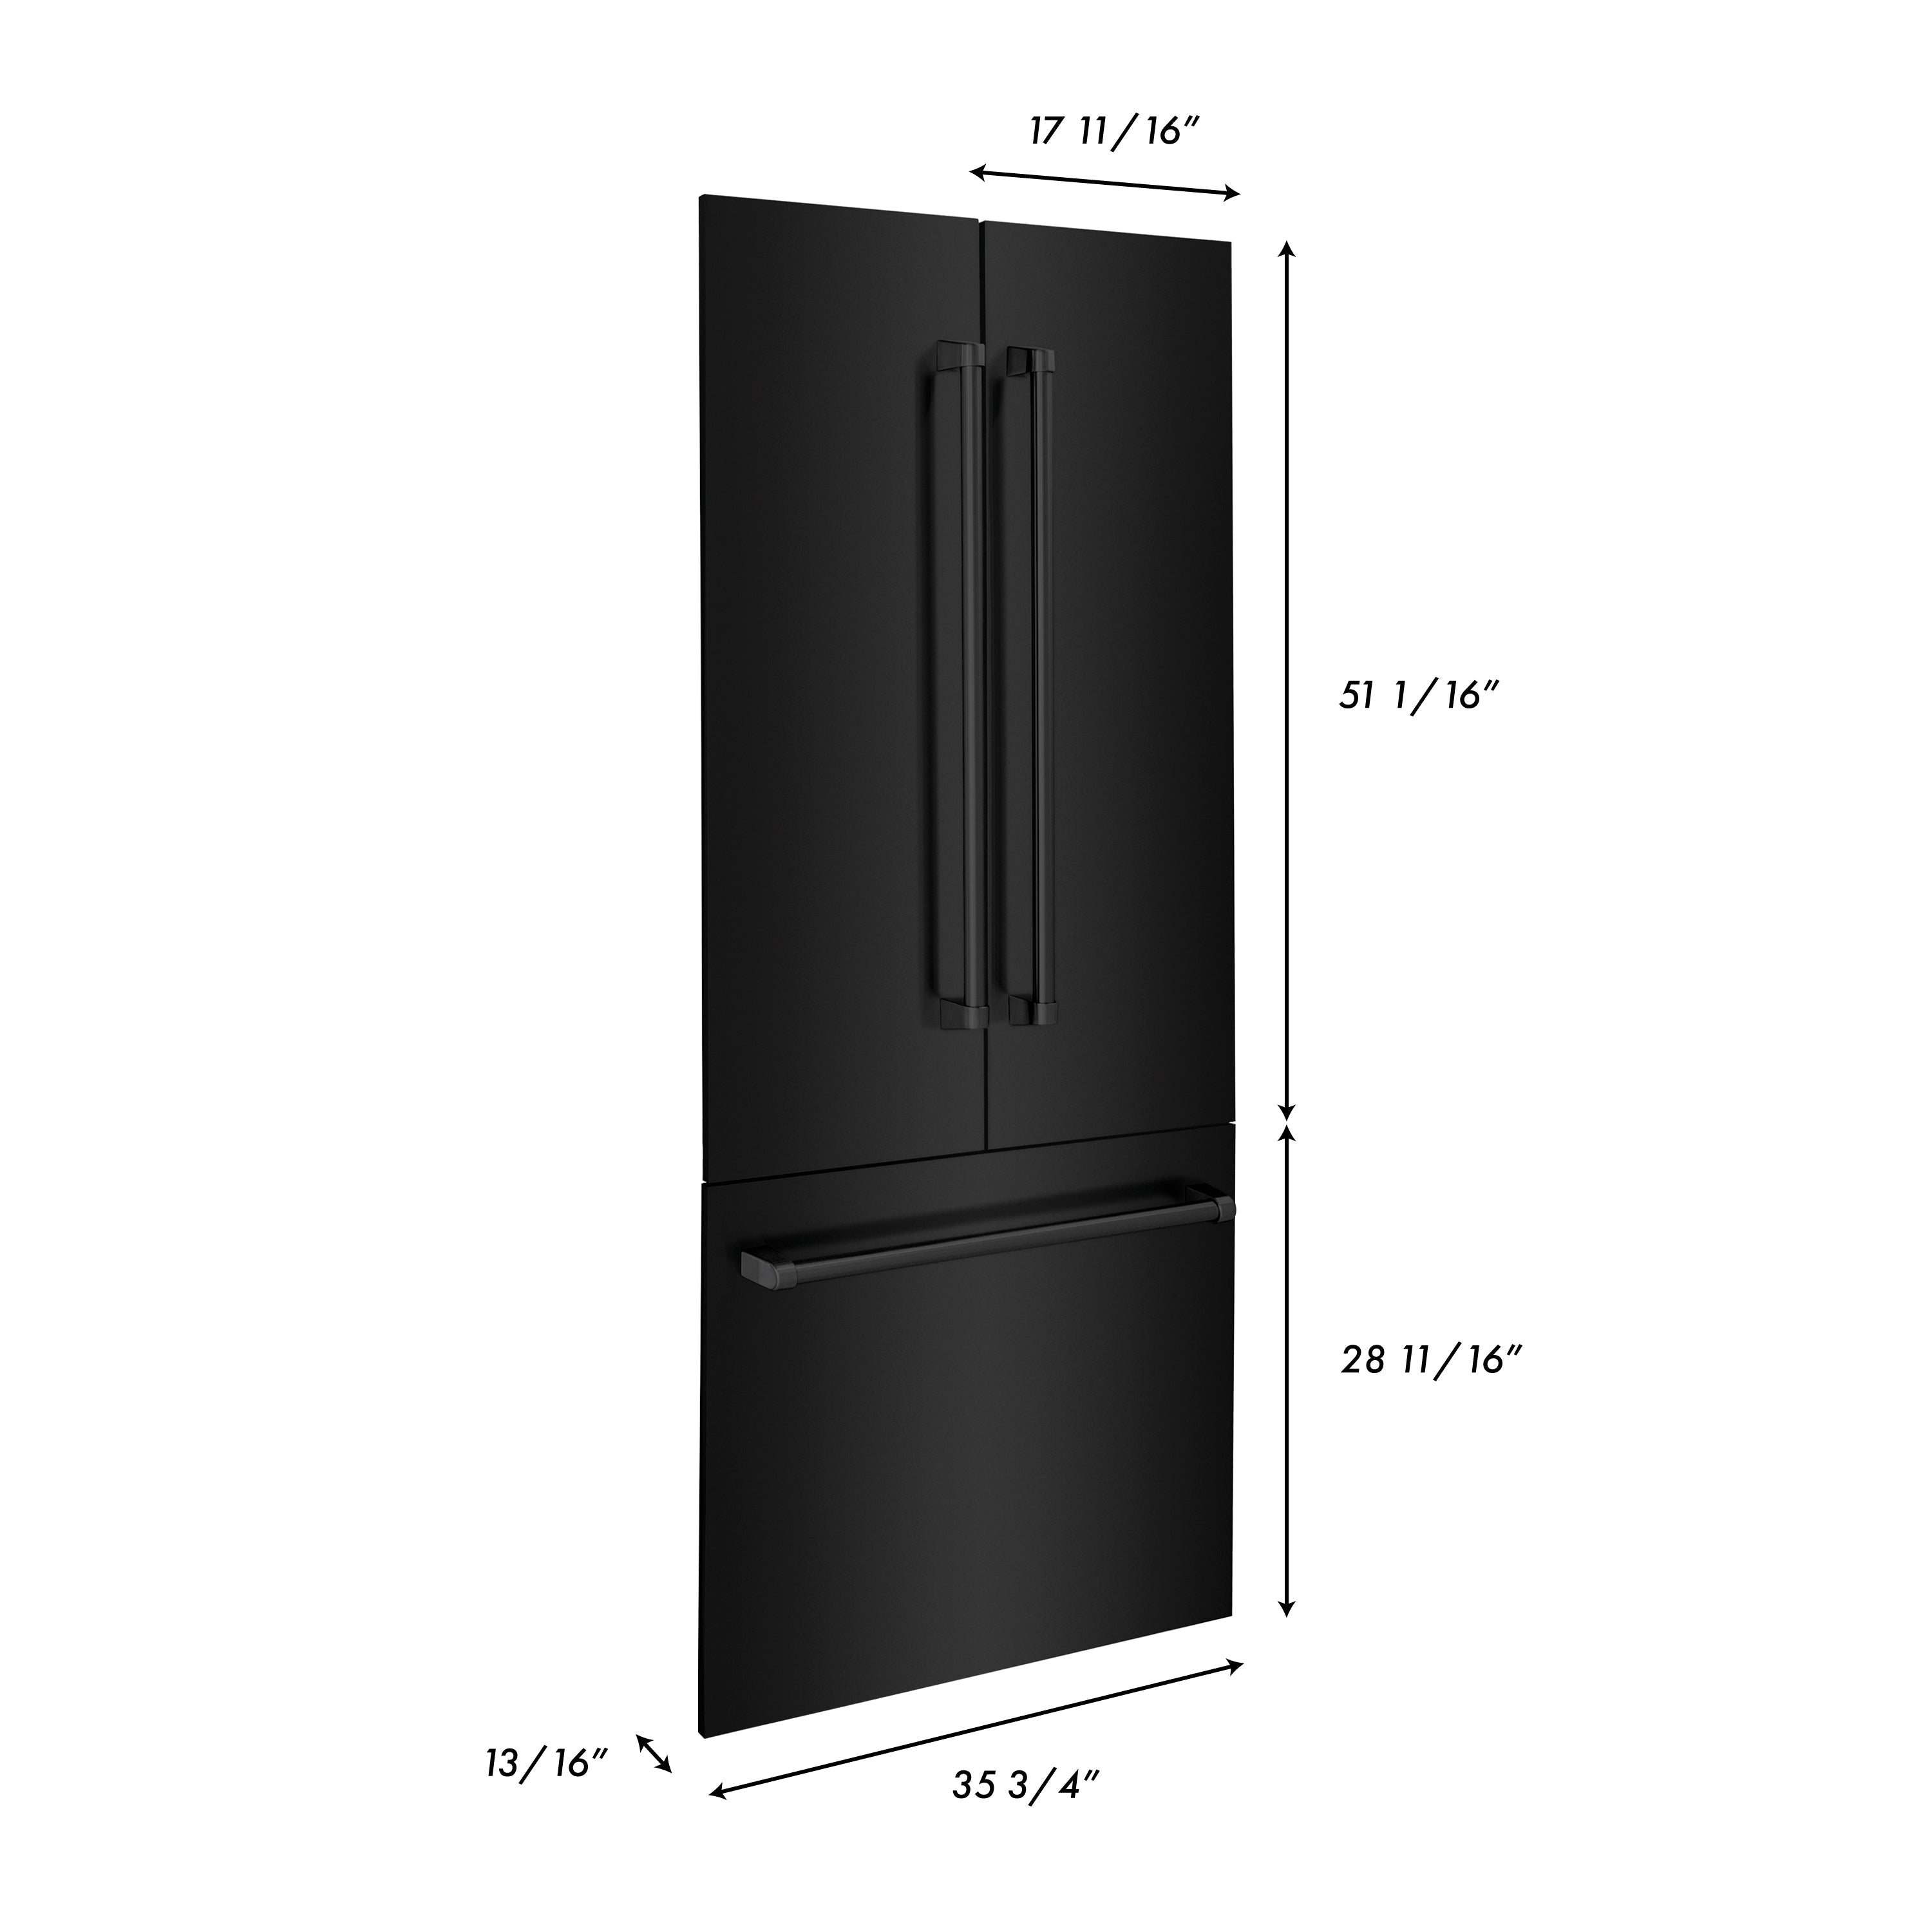 ZLINE 36" Refrigerator Panels in Black Stainless Steel for a 36" Buit-in Refrigerator (RPBIV-BS-36)